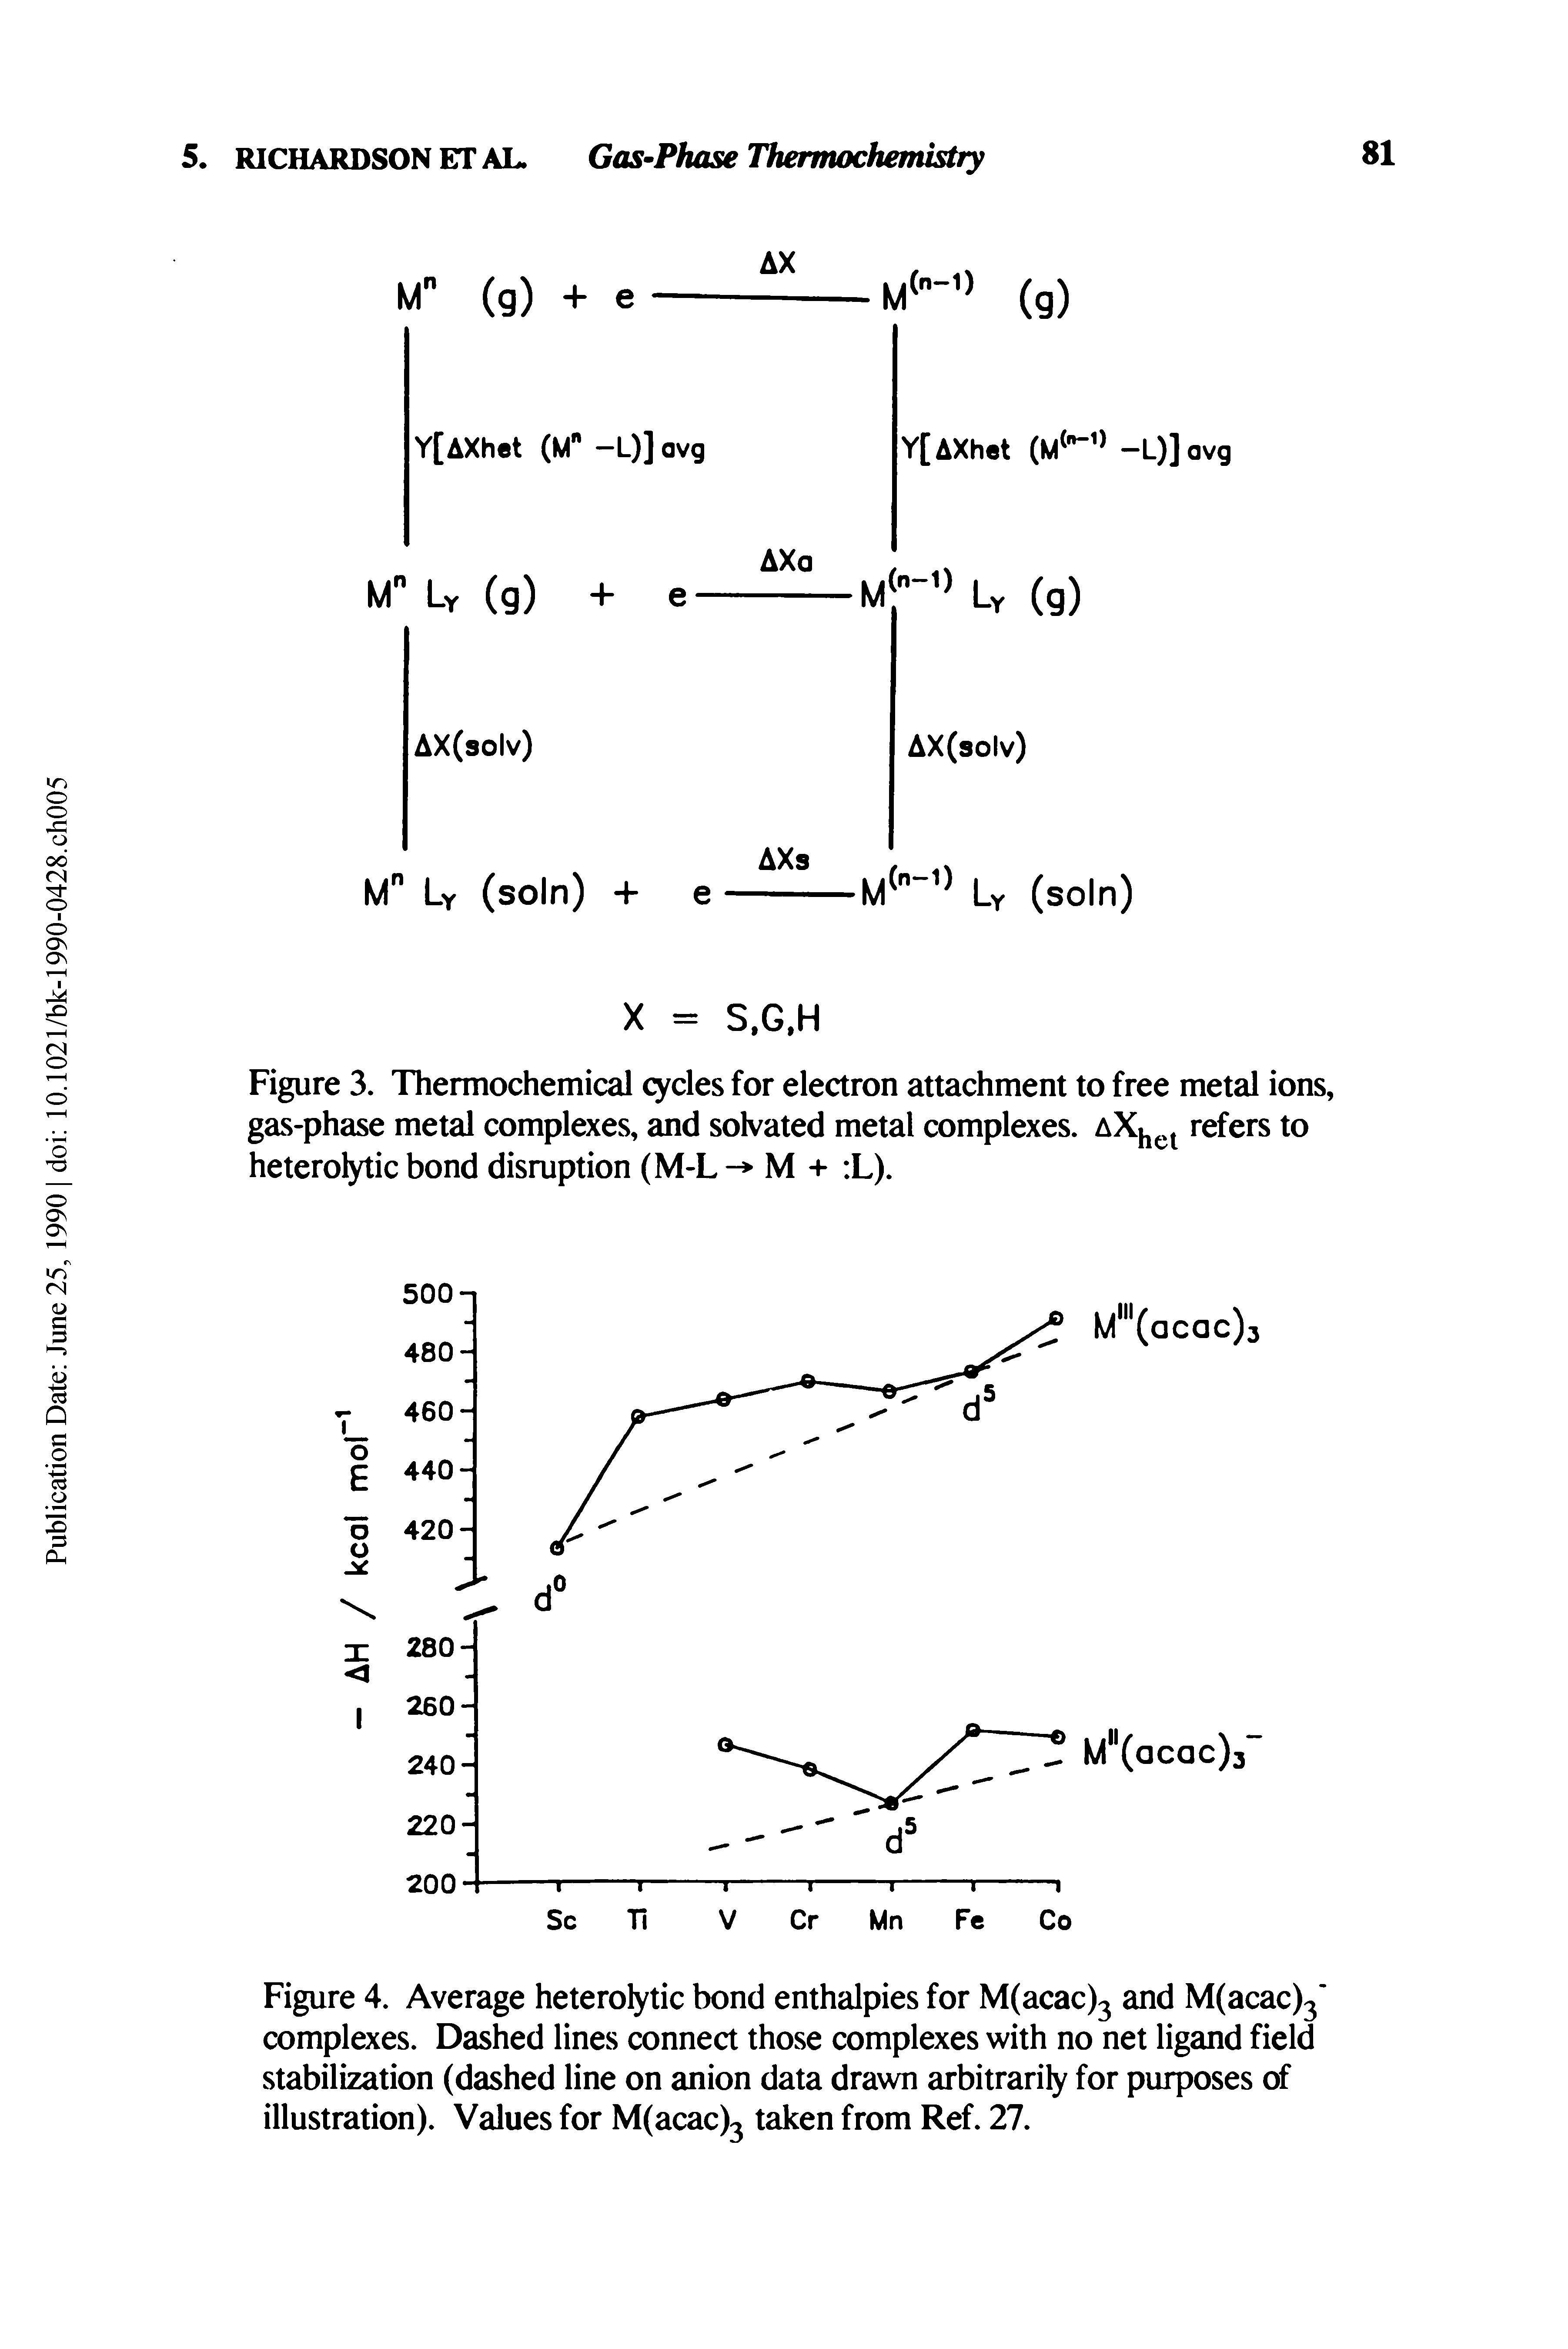 Figure 3. Thermochemical cycles for electron attachment to free metal ions, gas-phase metal complexes, and solvated metal complexes. refers to heterolytic bond disruption (M-L- M + L).